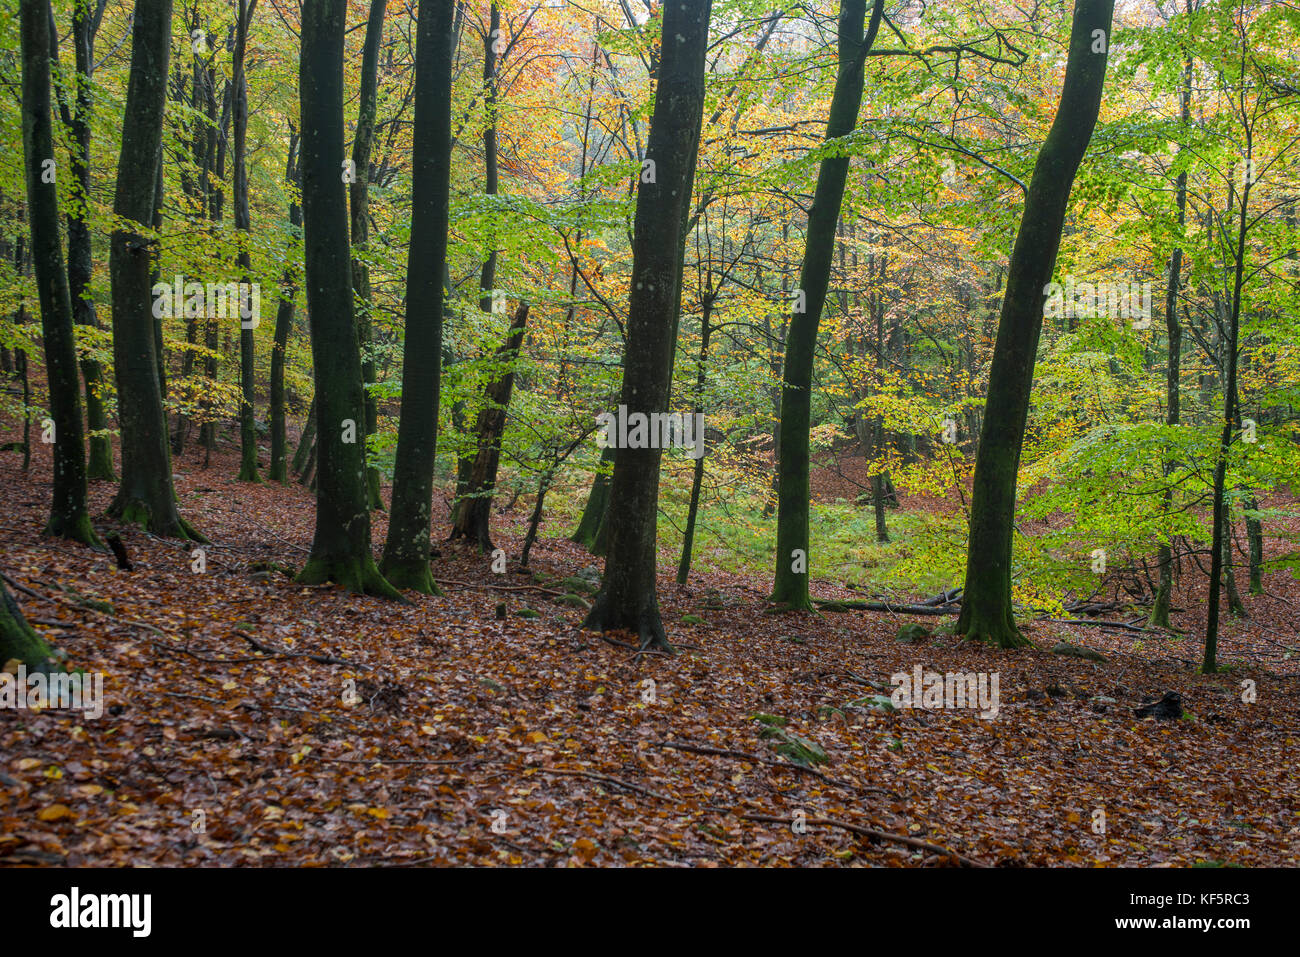 Beech forest in autumn colours Stock Photo